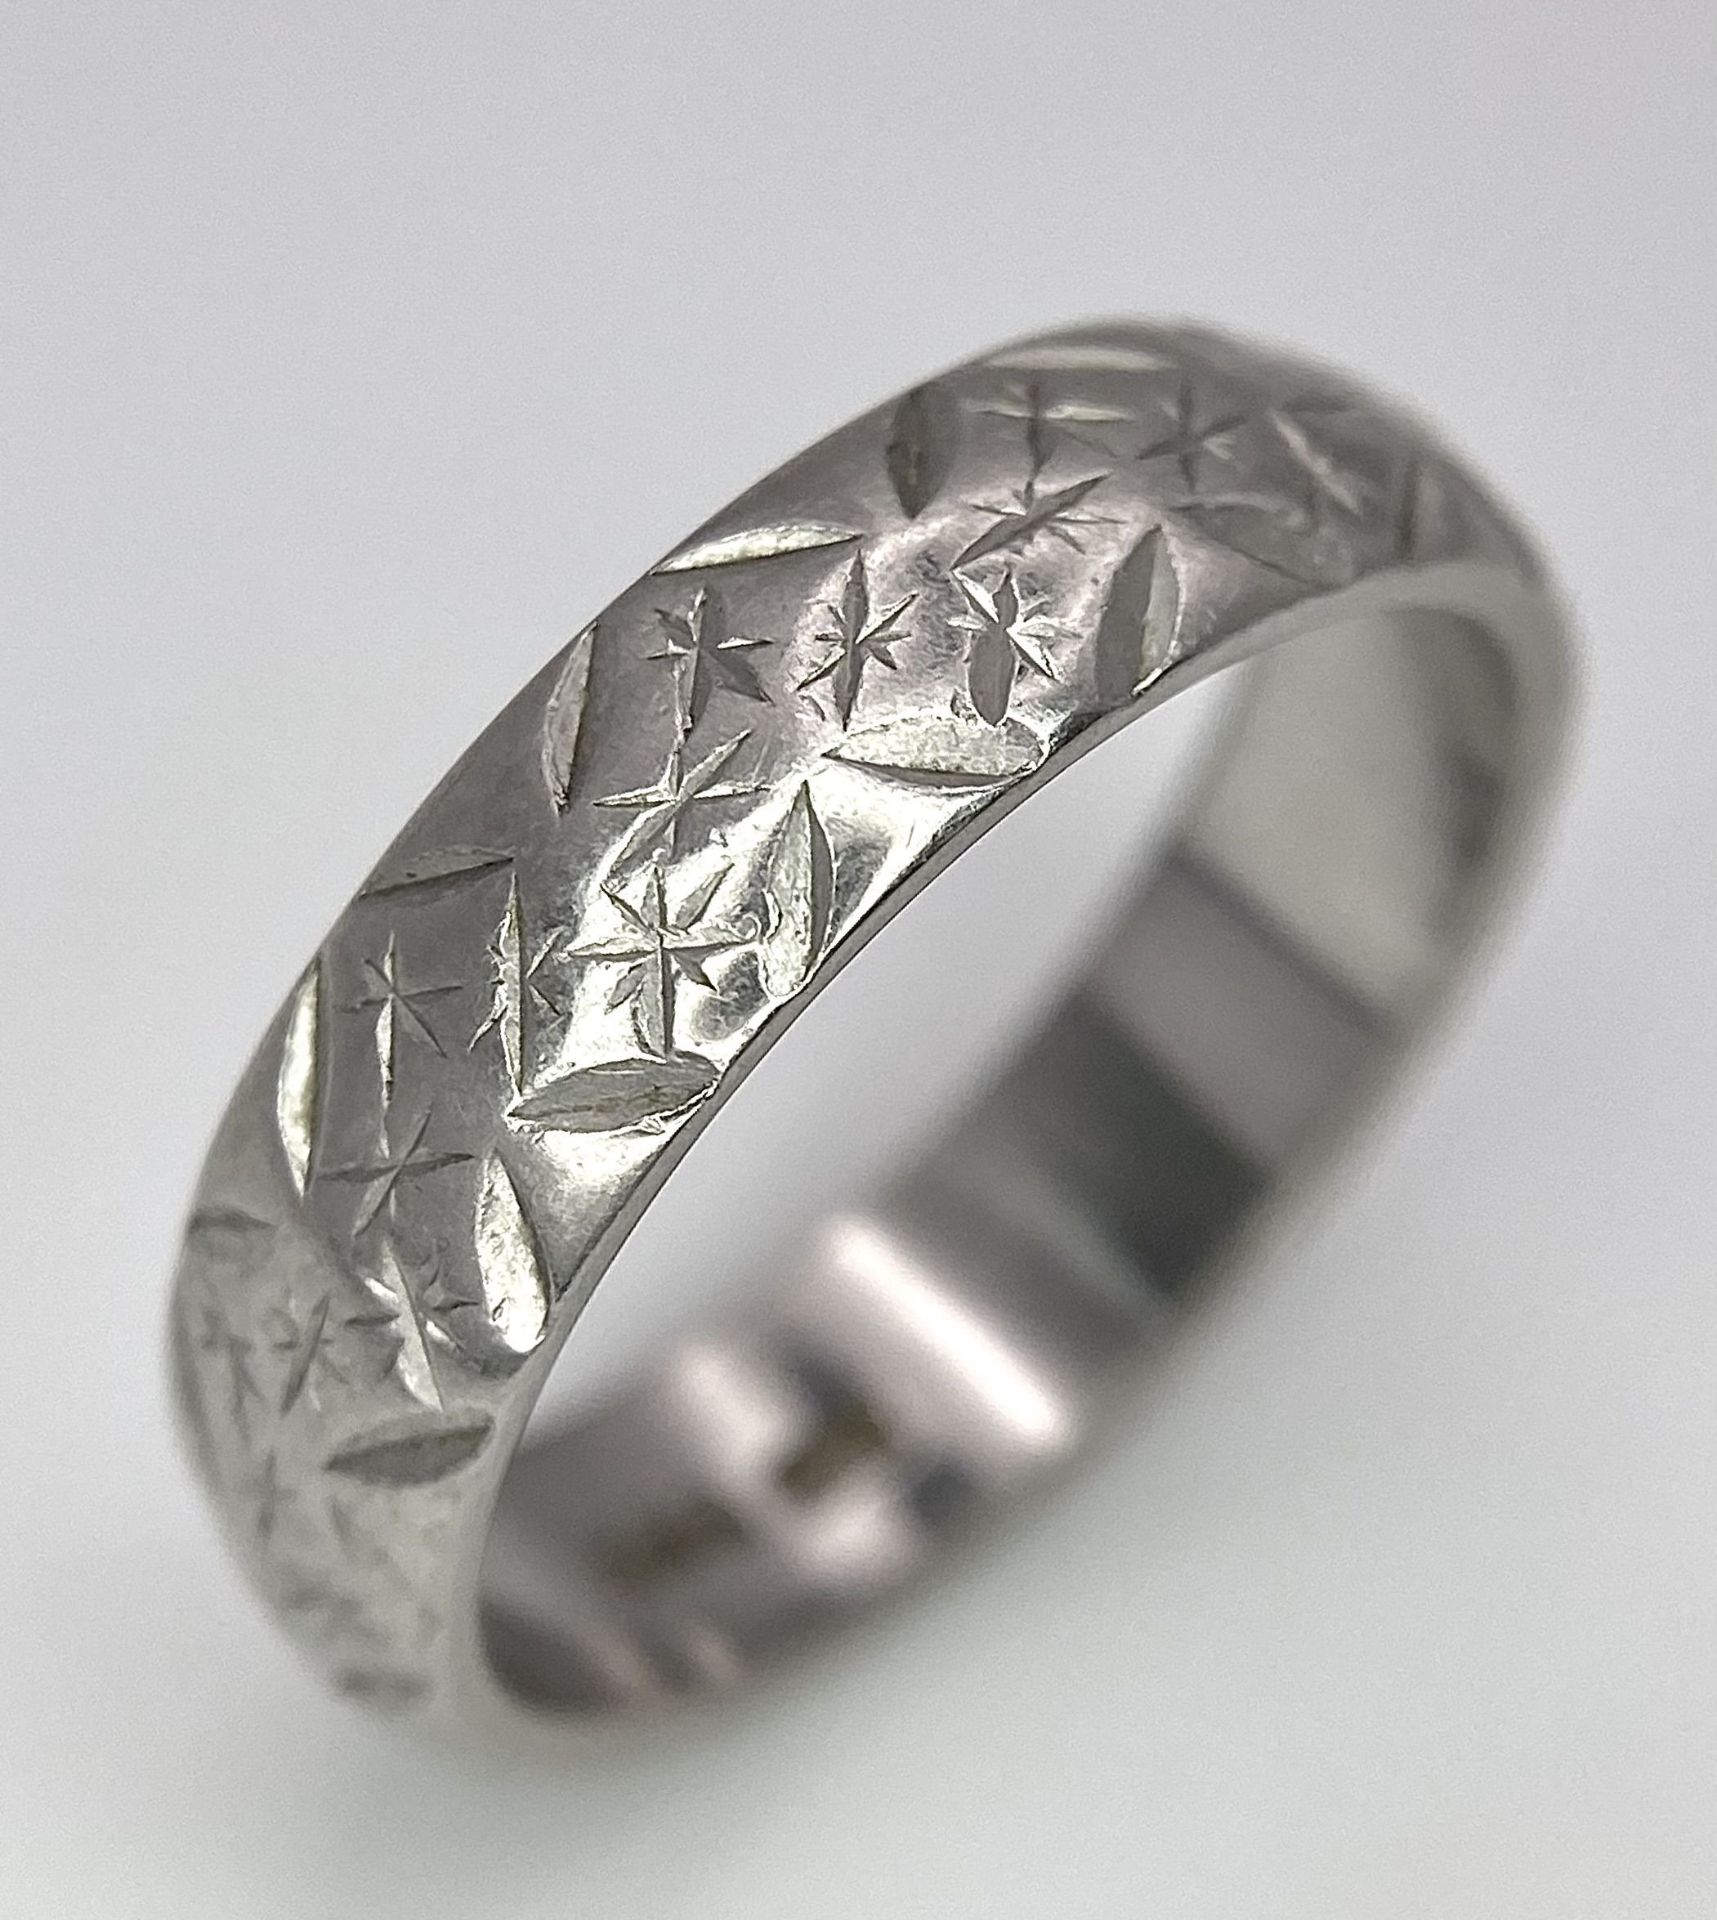 A Vintage Platinum Band Ring with Geometric Decorative Pattern. 5mm width. Size P. 7.5g - Image 2 of 6